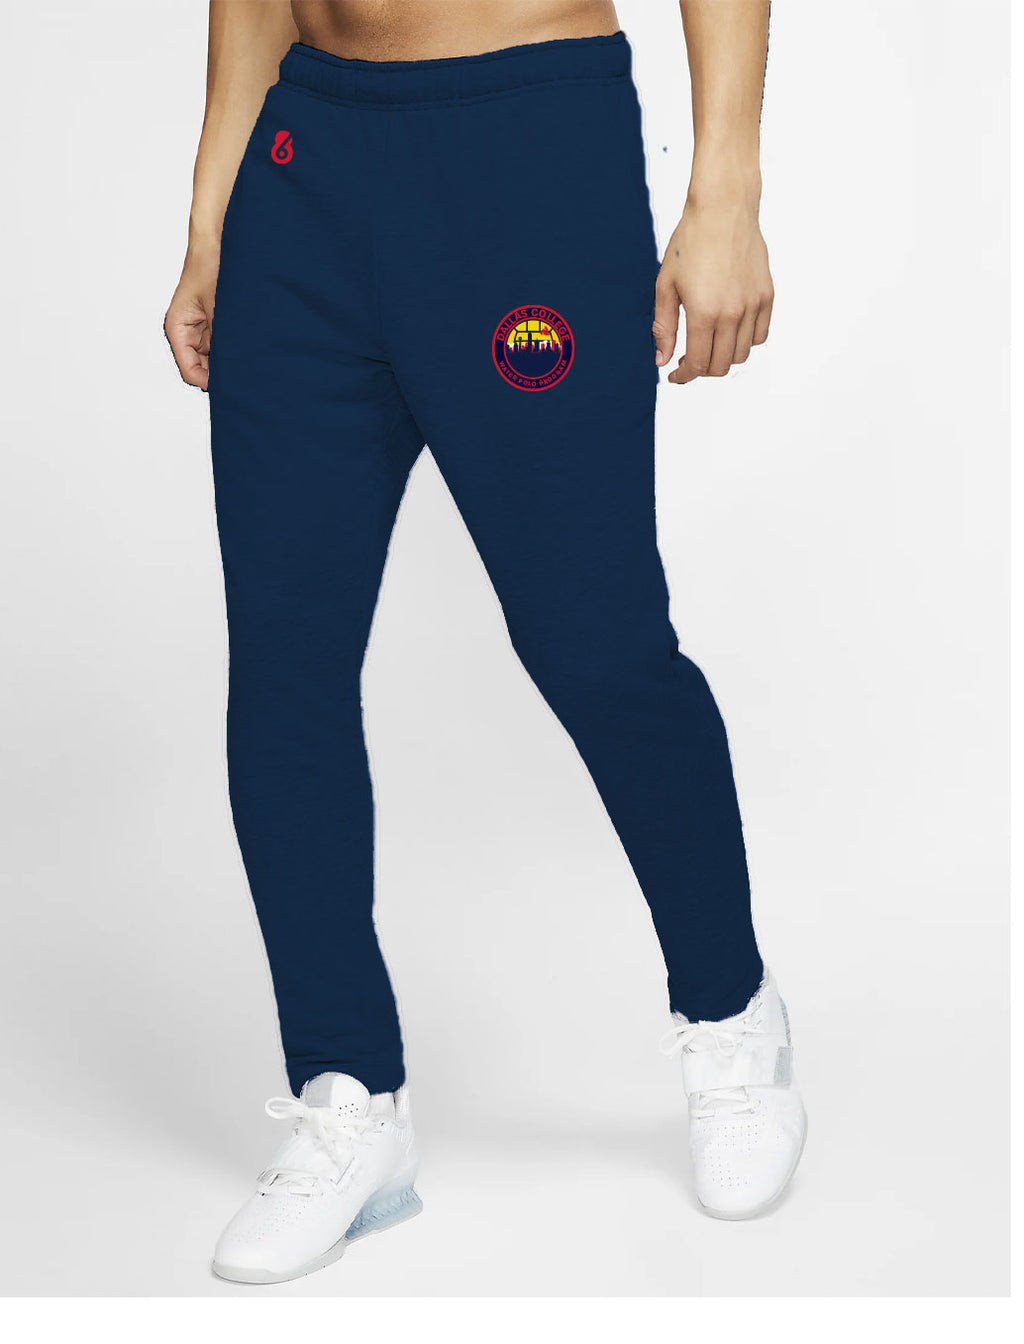 Dallas College Water Polo Program Navy Track Pant